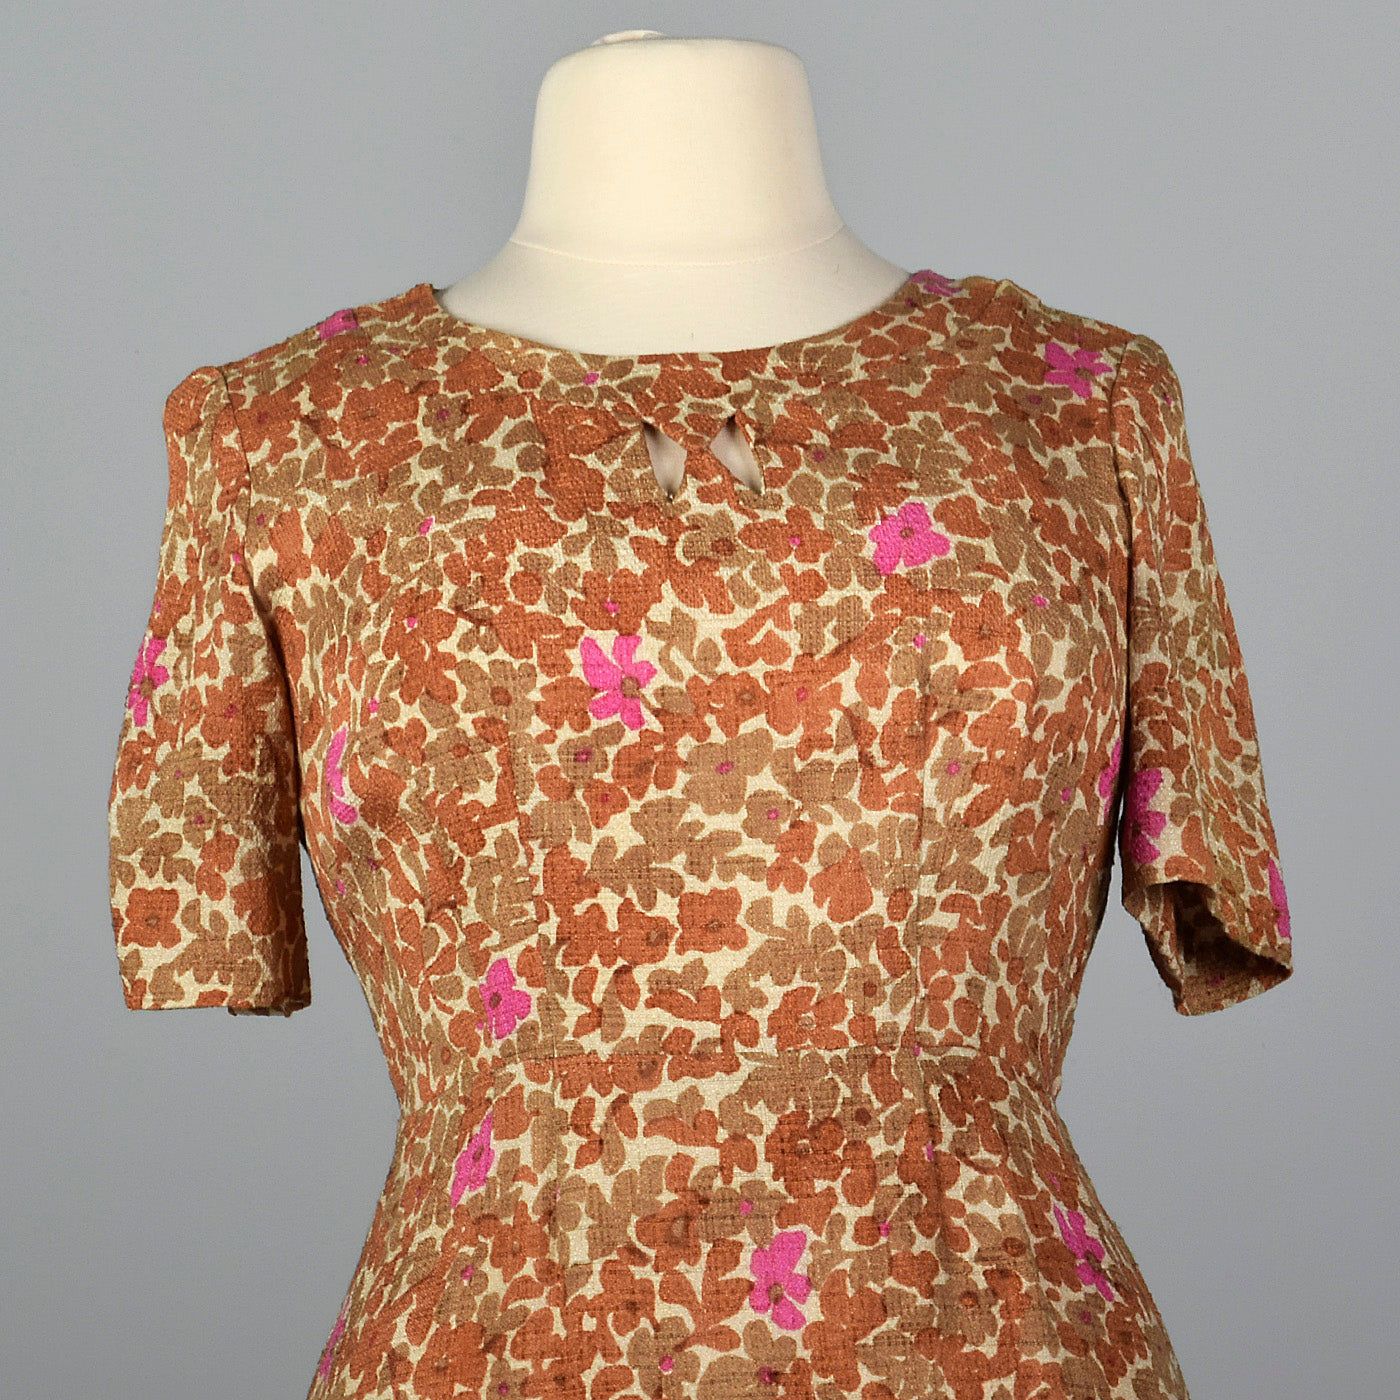 1950s Brown Floral Dress with Cut Out Neck